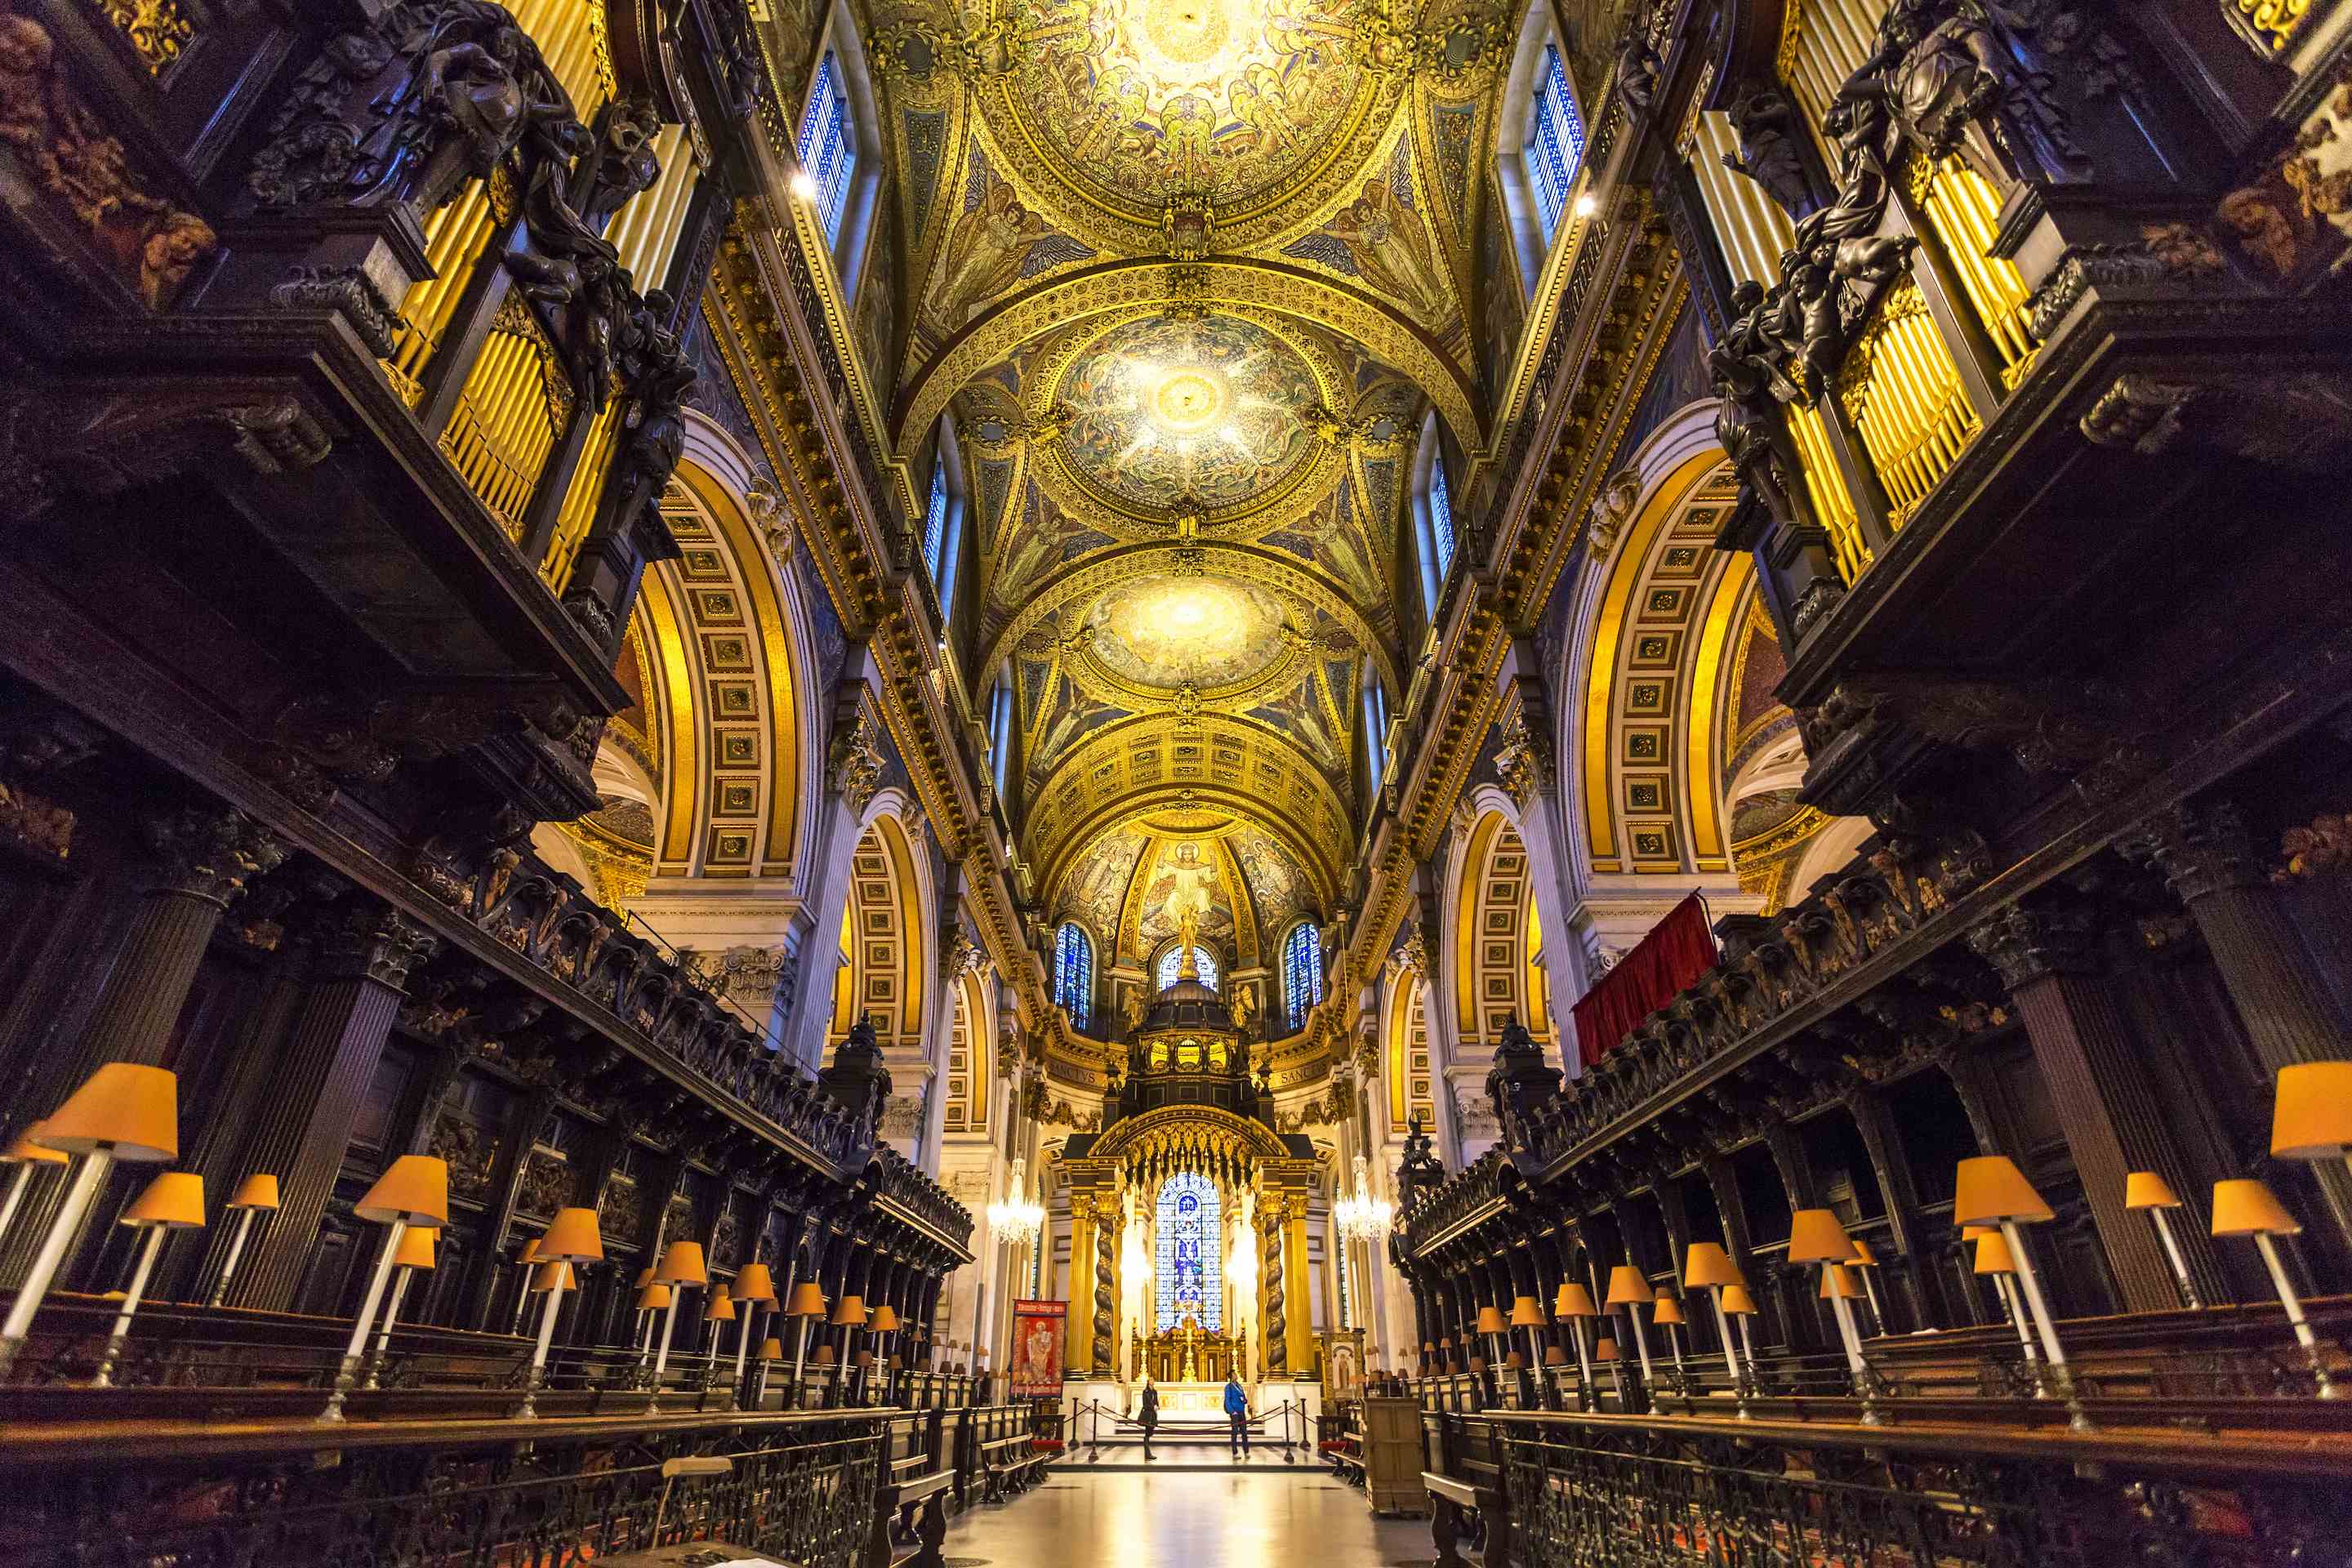 Internal view of St Paul's Cathedral in London, UK